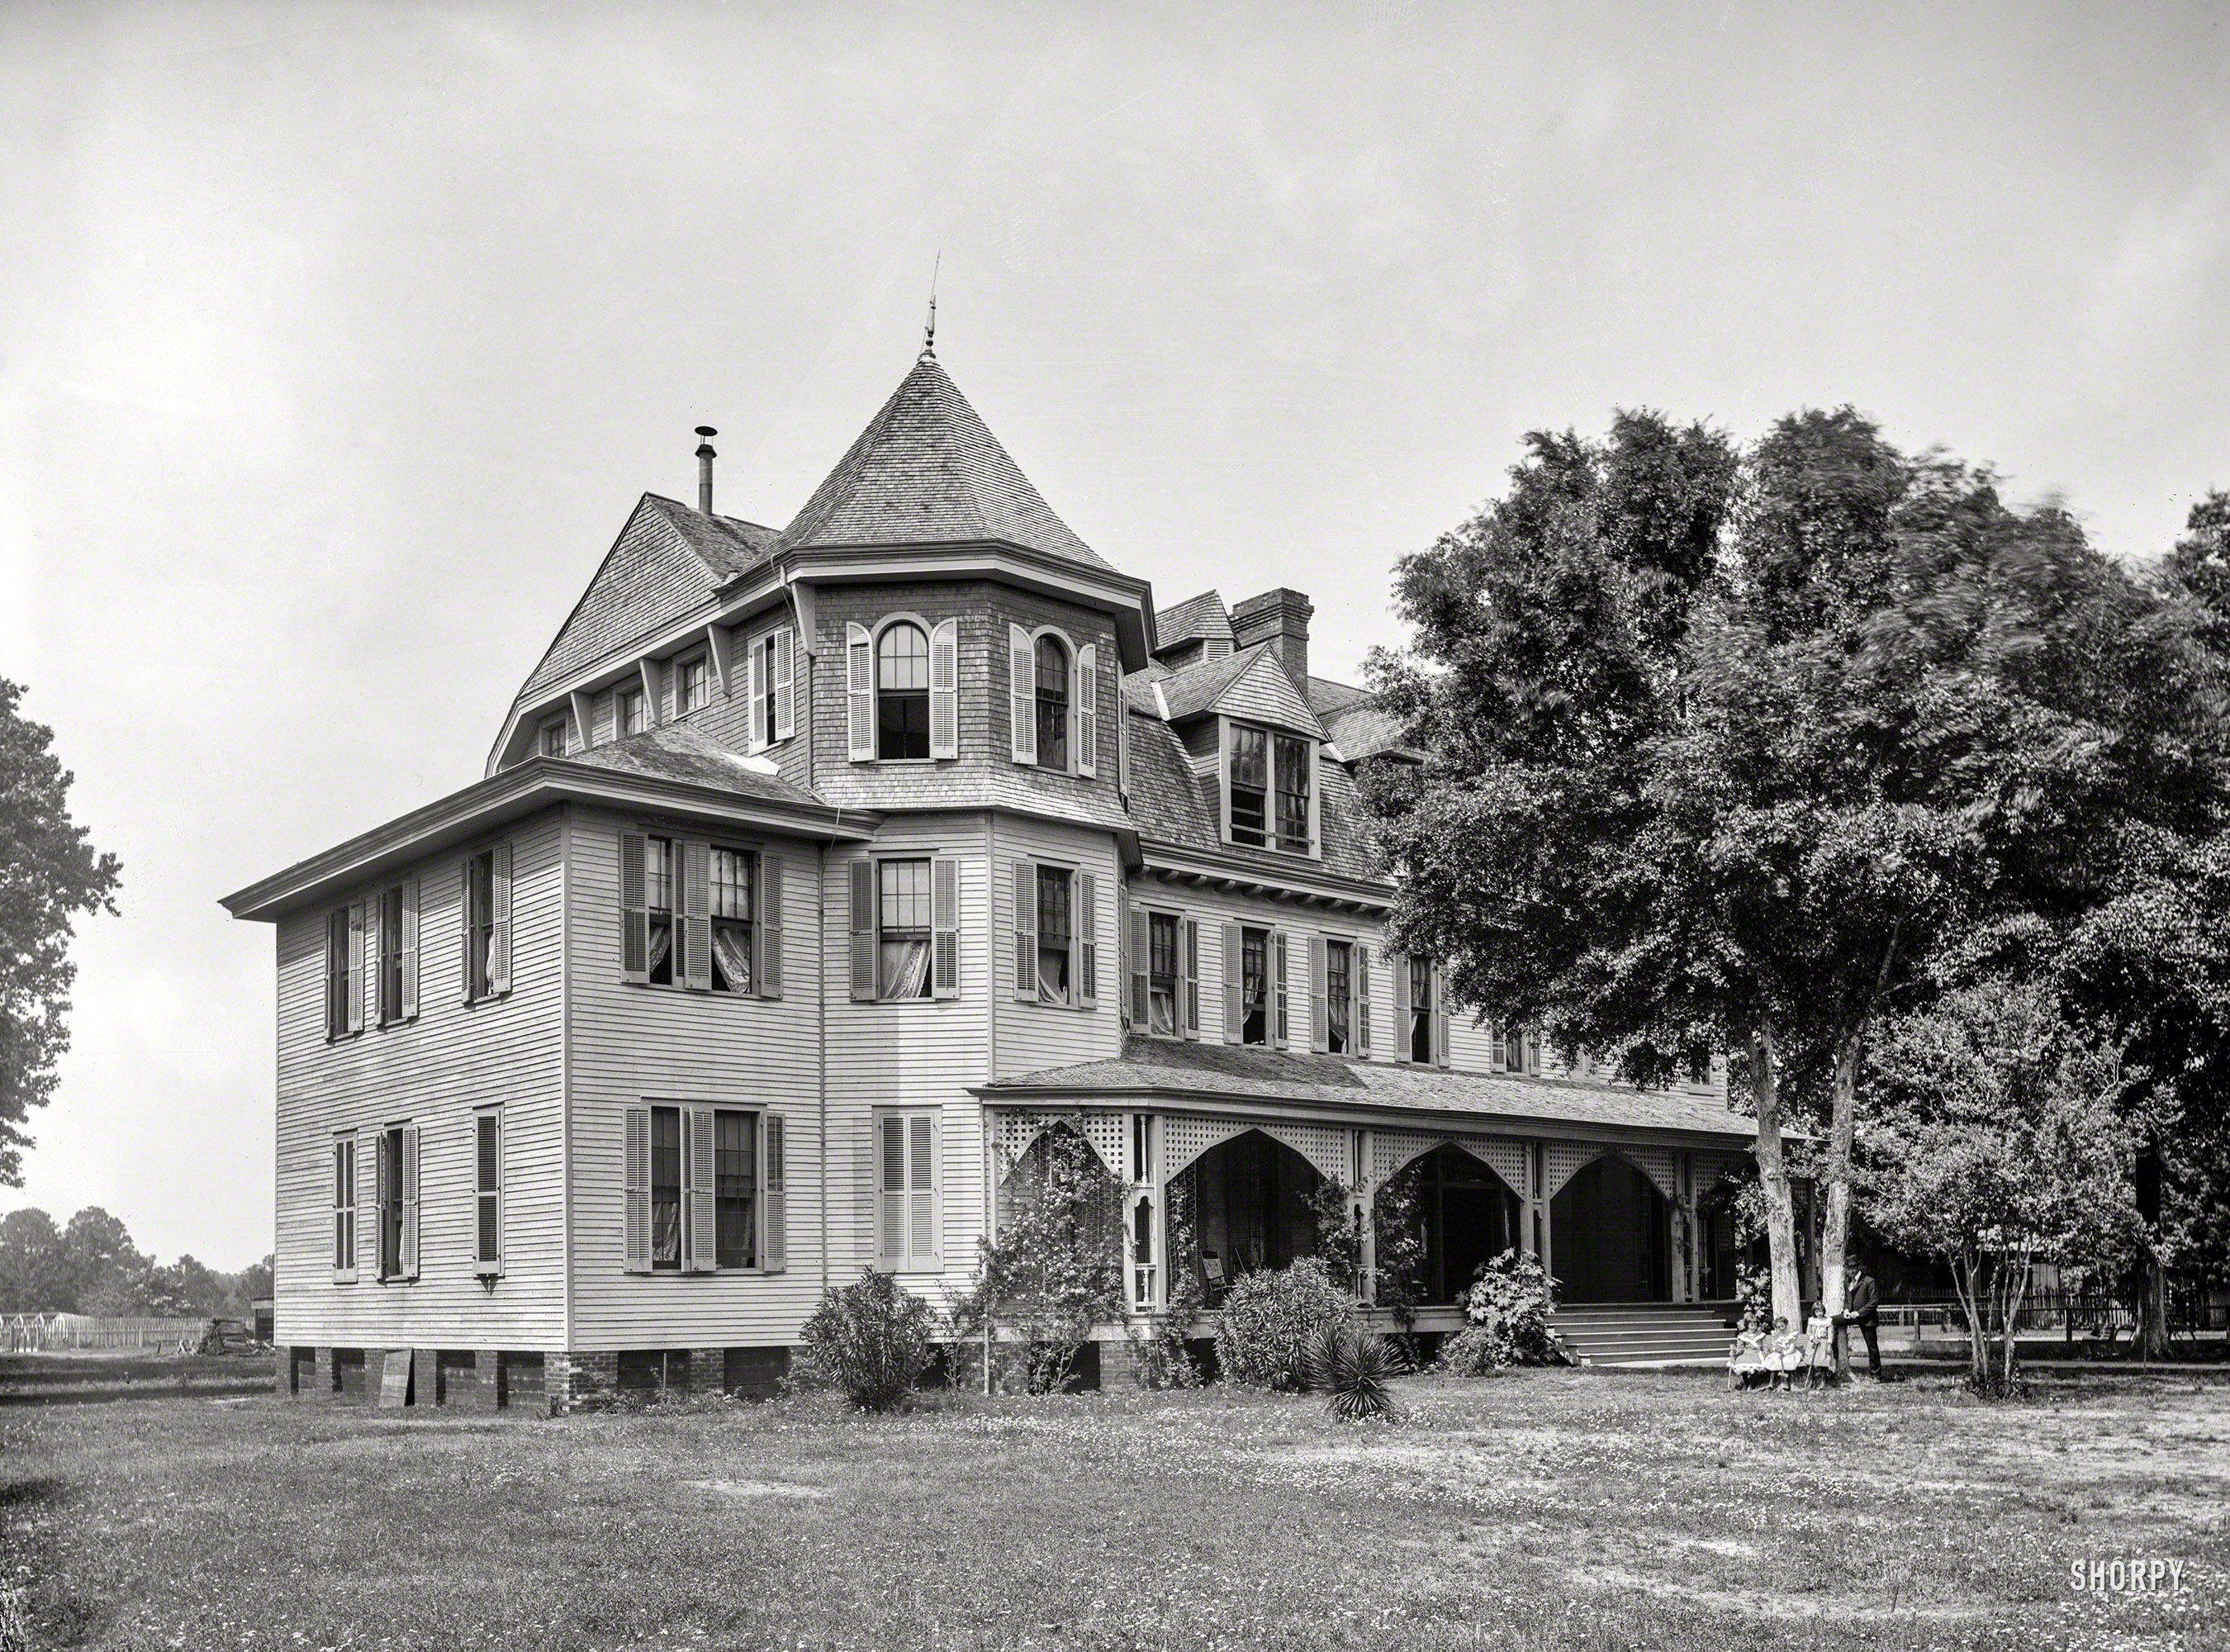 Circa 1900. "Magnolia Hotel, Pass Christian, Mississippi." 8x10 inch dry plate glass negative, Detroit Publishing Company. View full size.